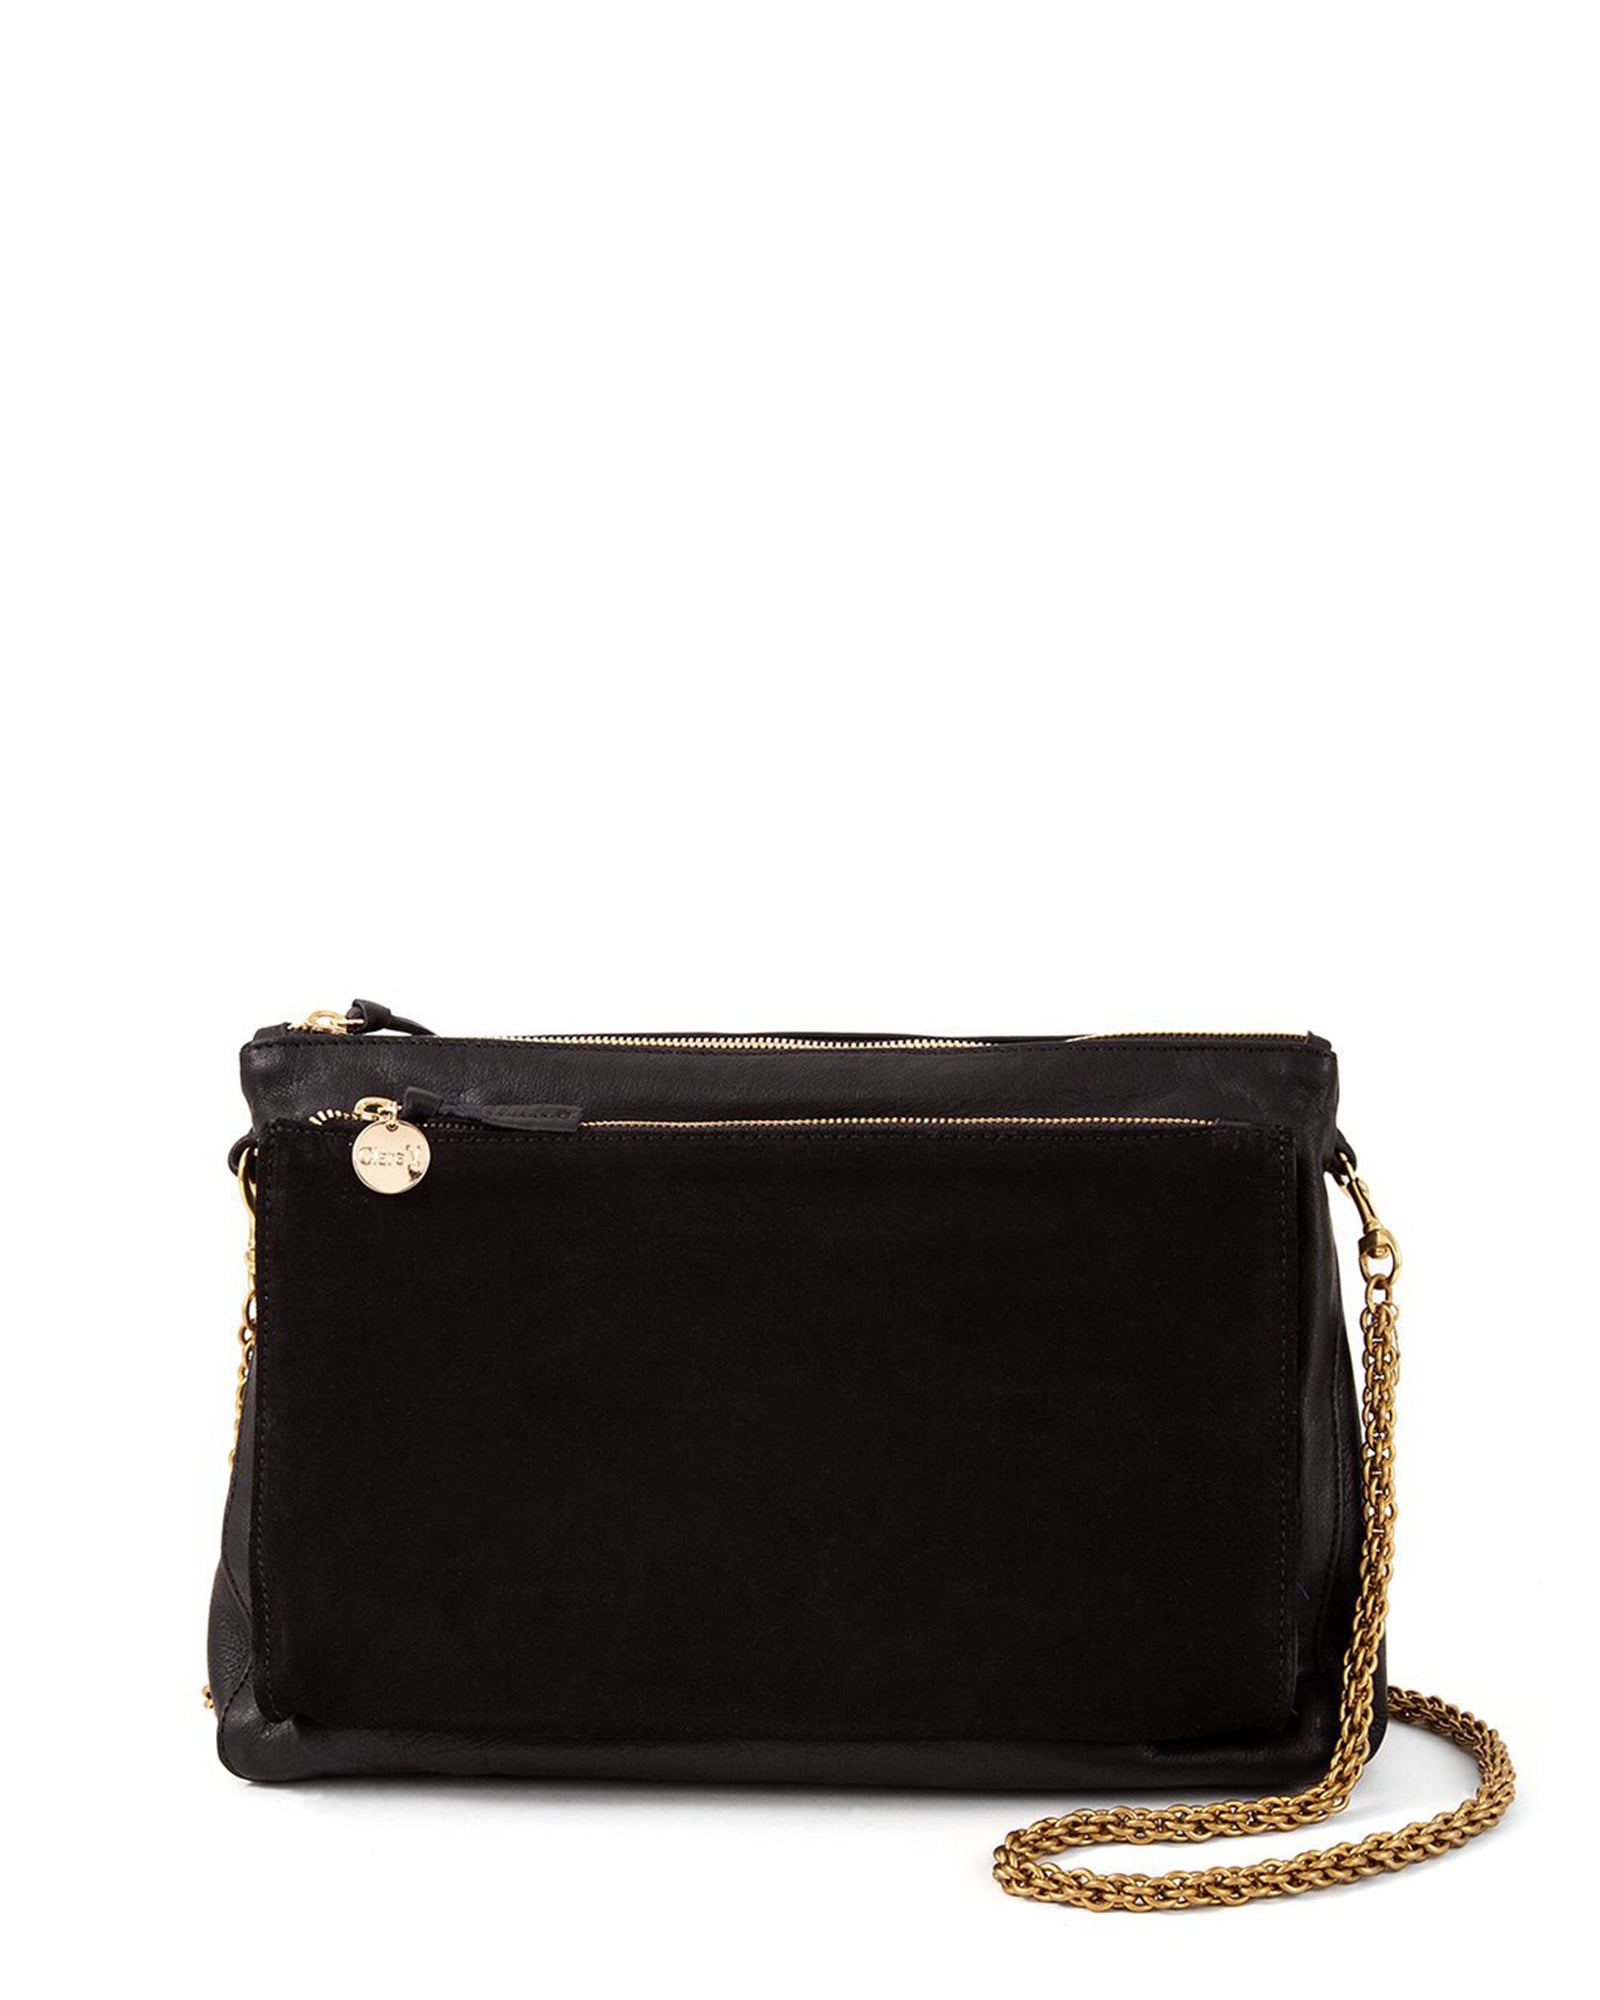 Thick Chain Shoulder Strap on Black Gosee Clutch